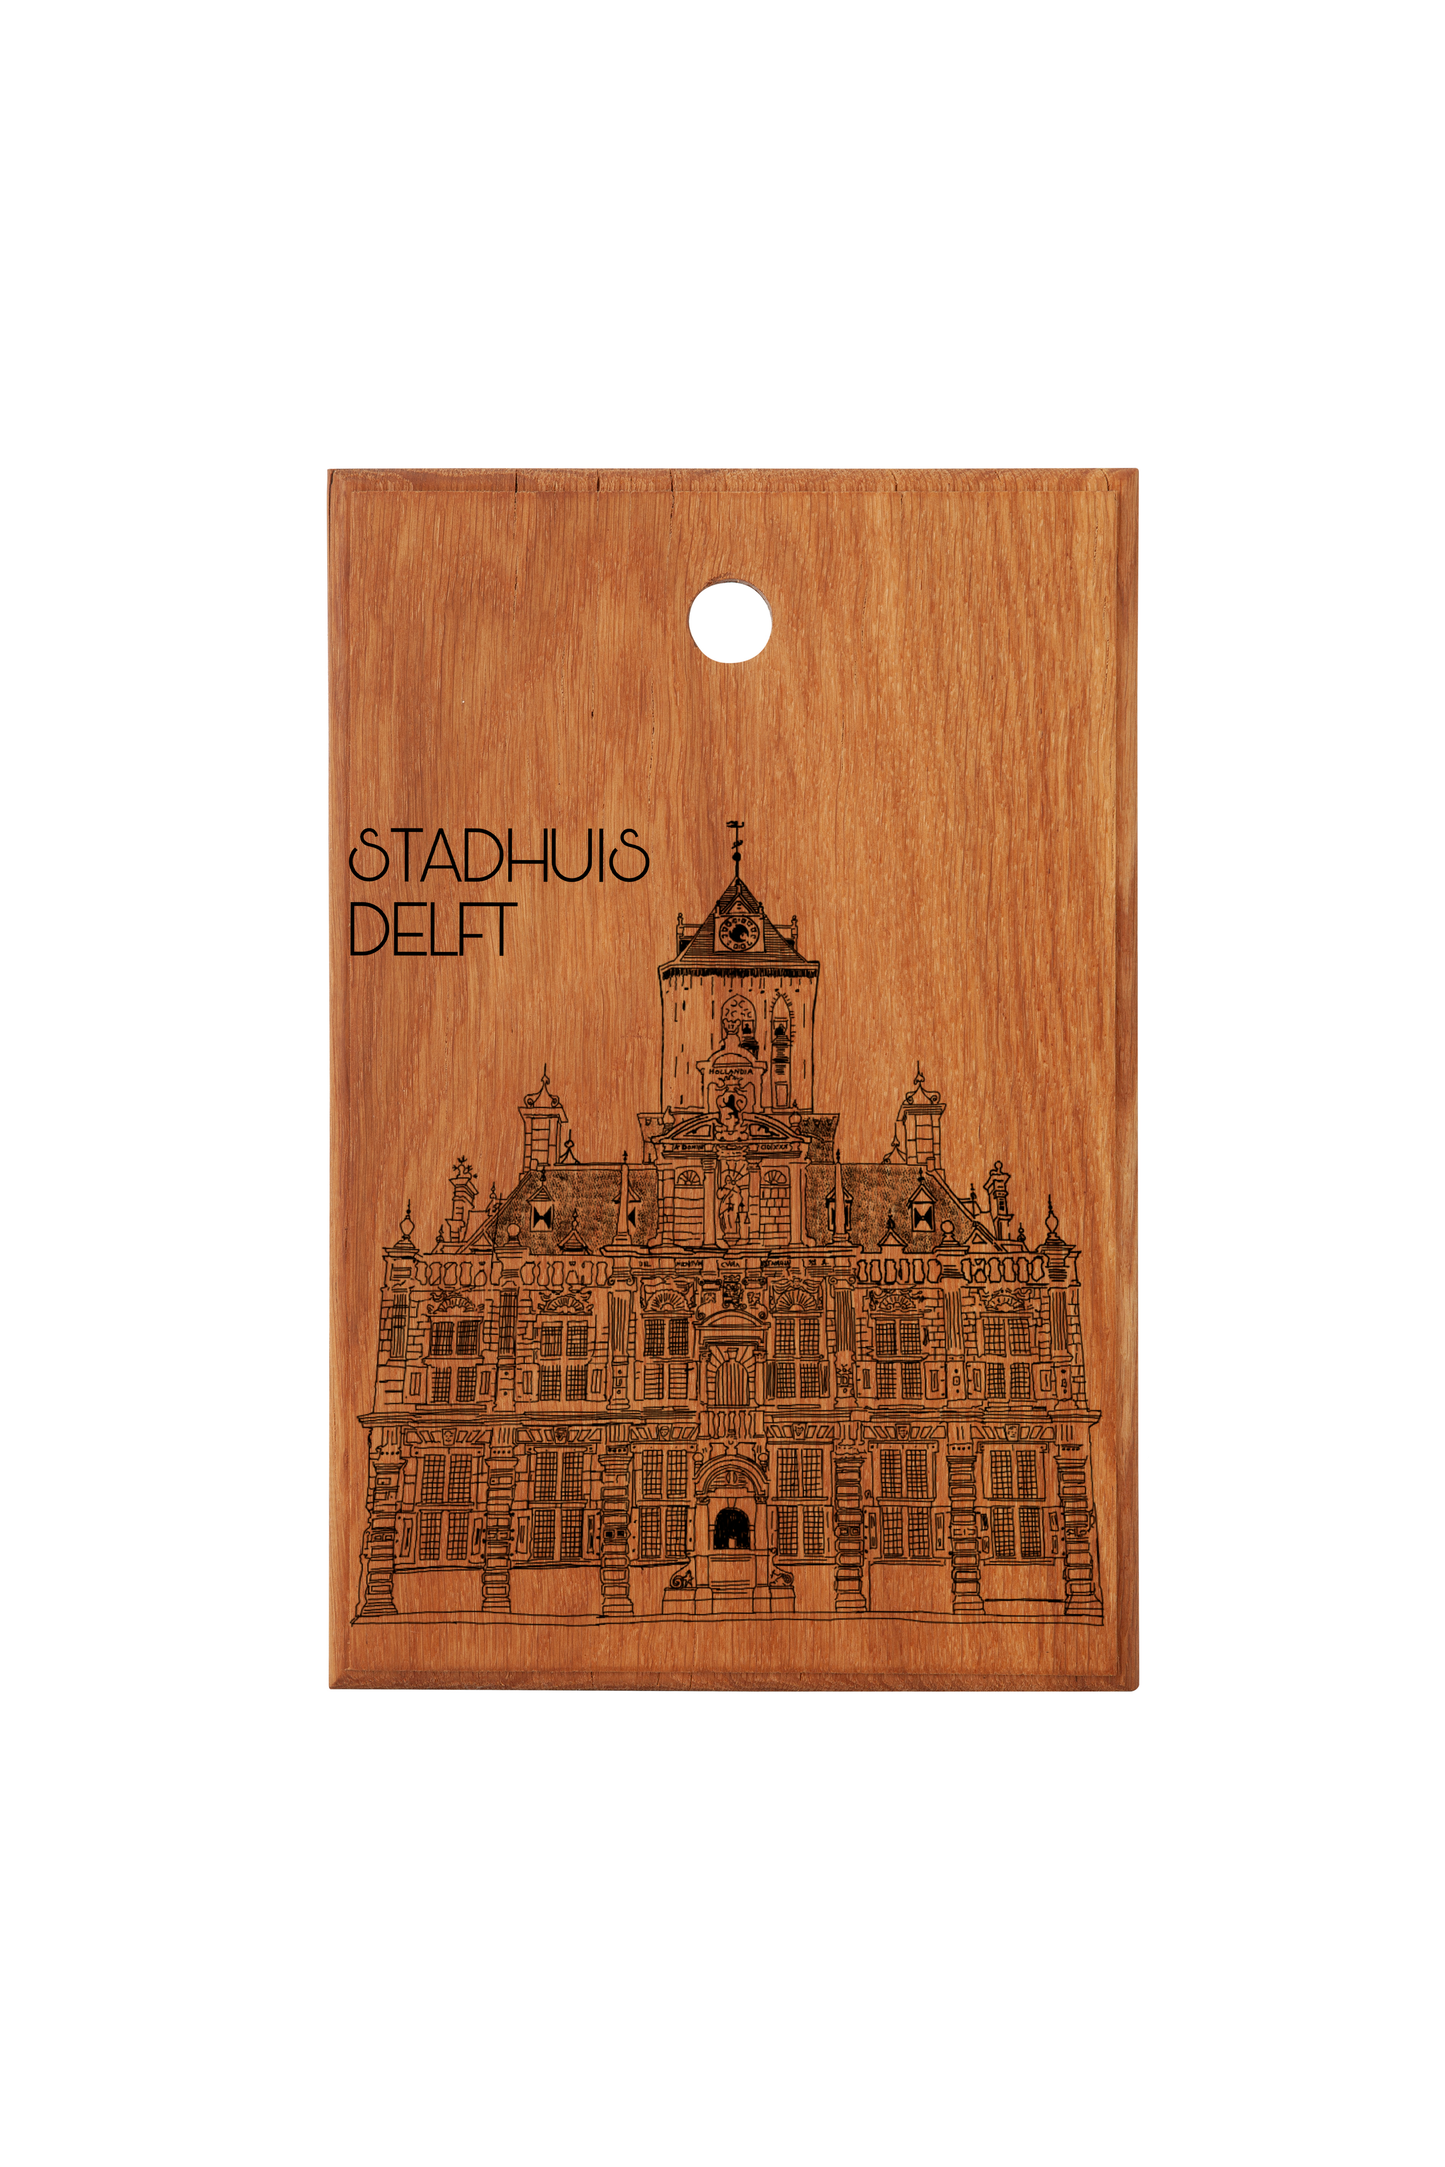 Oak Wood Variant of Handmade Stadhuis Delft Engraved Cutting Board